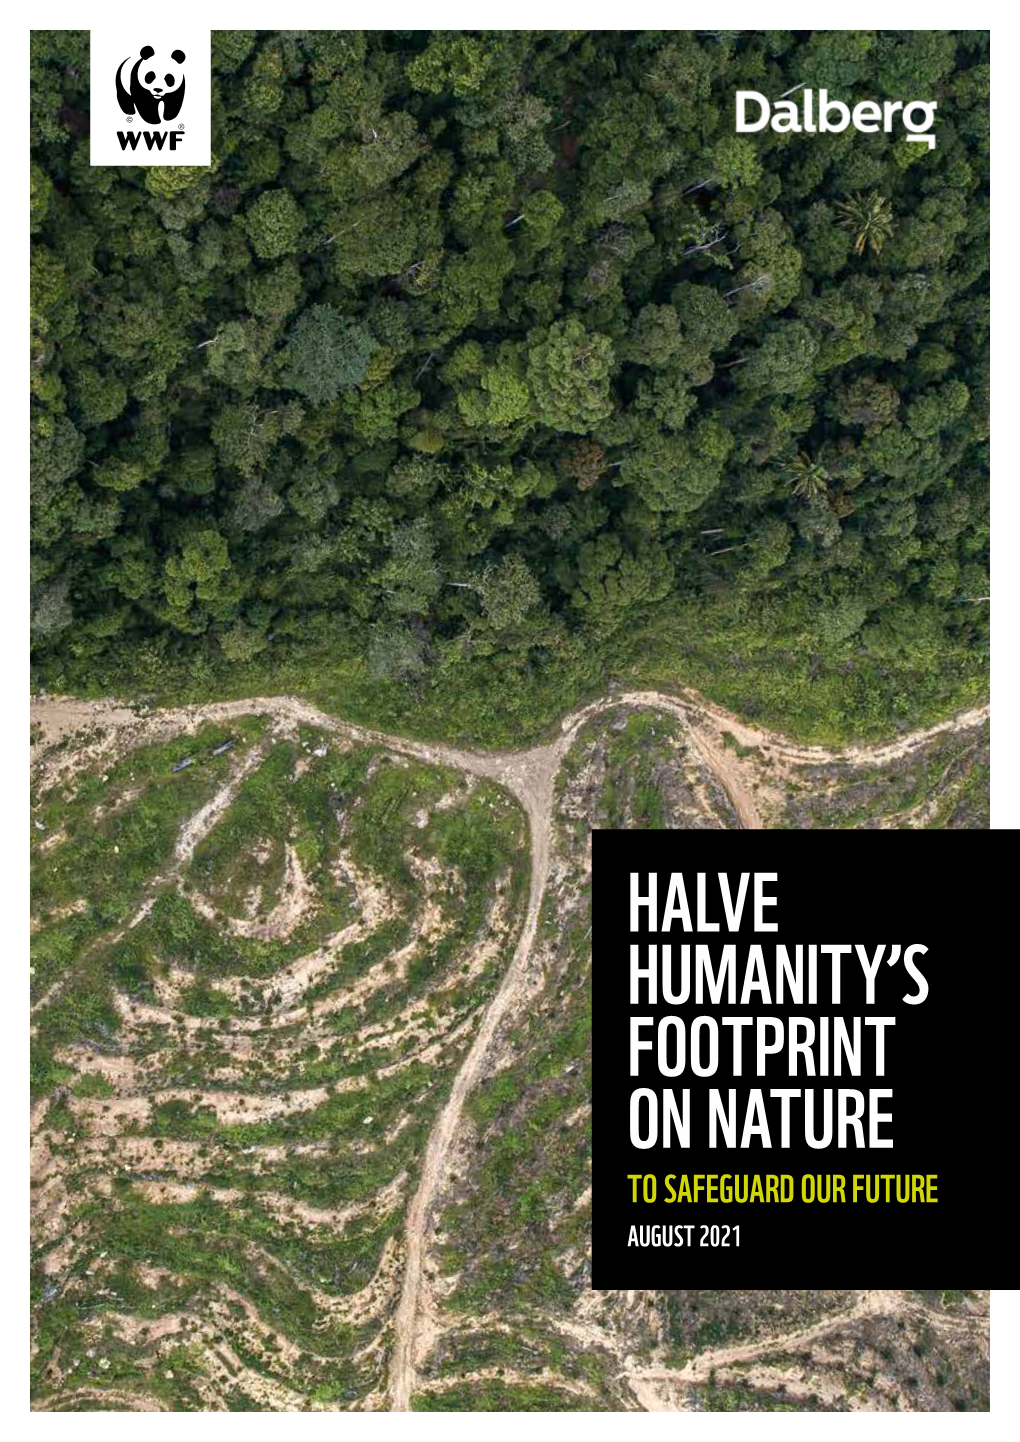 Halve Humanity's Footprint on Nature to Safeguard Our Future